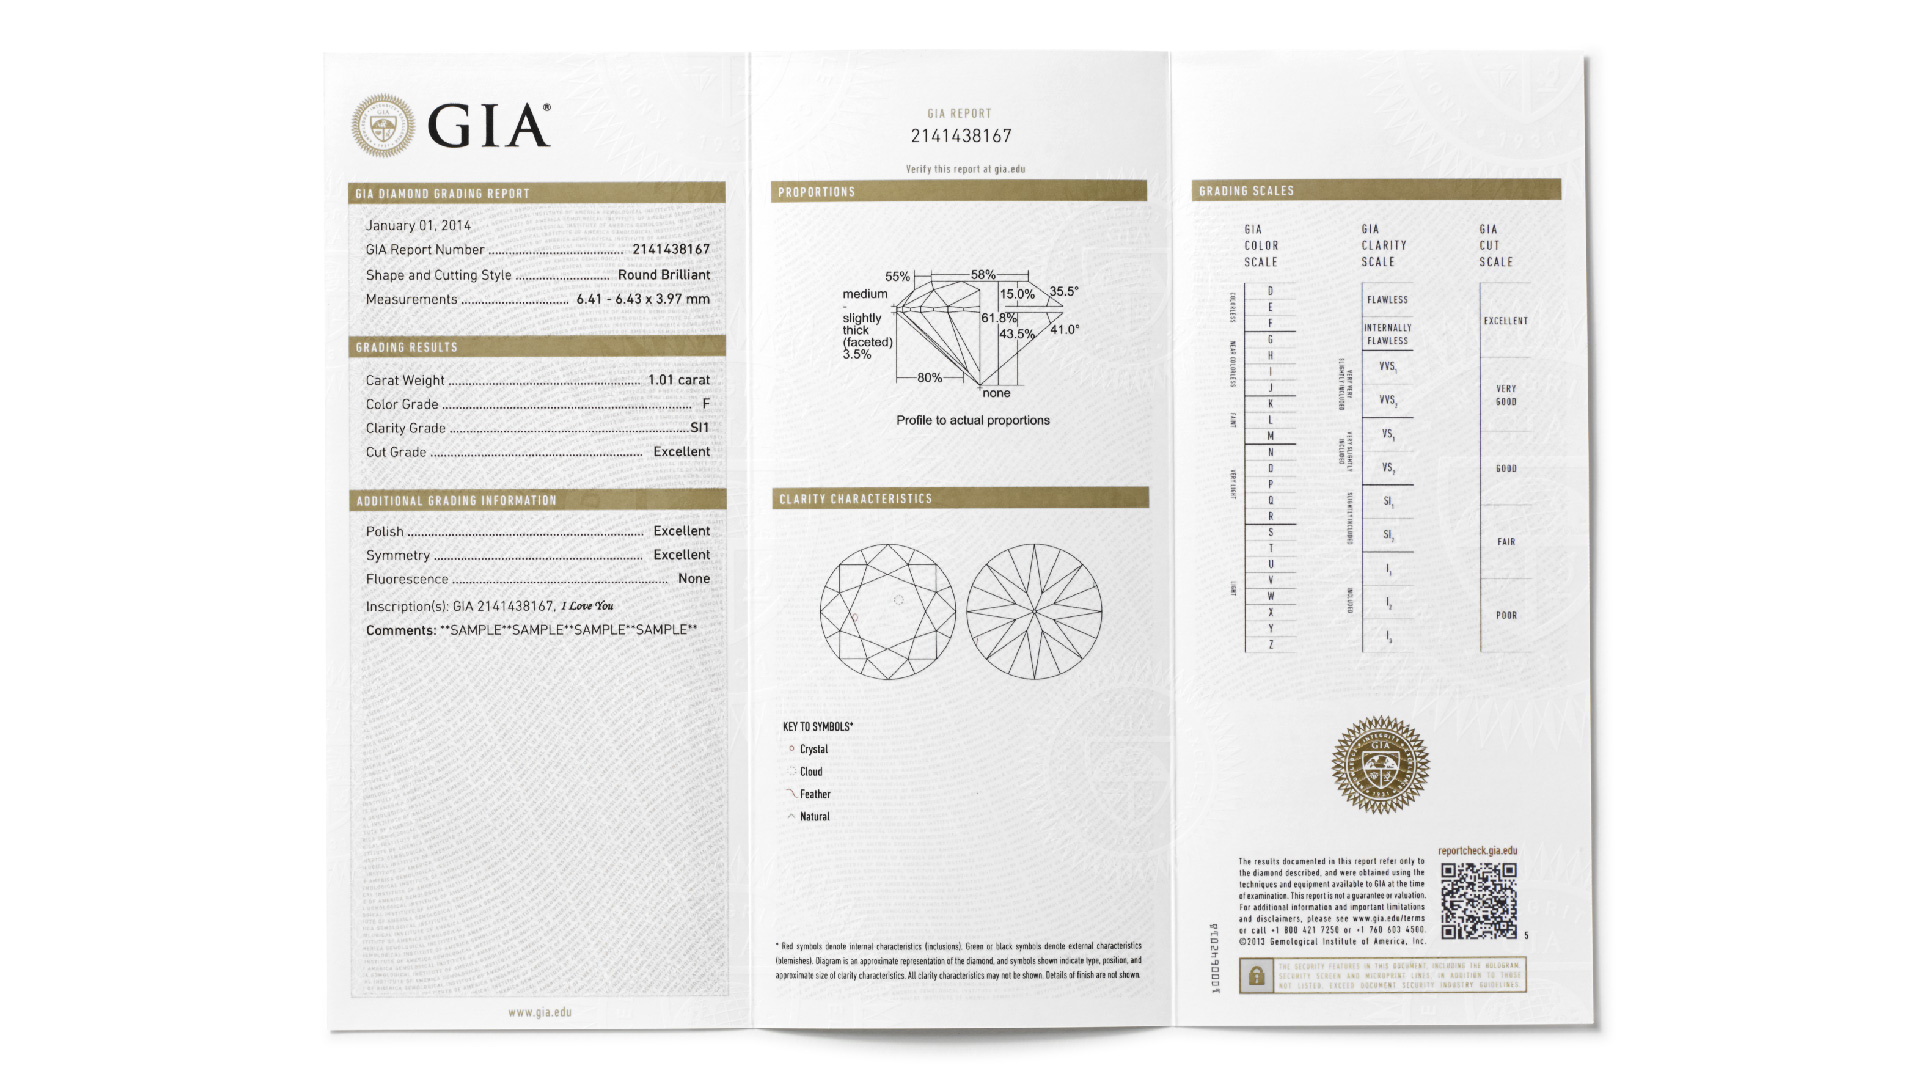 A GIA Diamond Grading Report includes an assessment of the 4Cs – Color, Clarity, Cut and Carat Weight – along with a plotted diagram of its clarity characteristics and a graphic representation of the diamond’s proportions. The report also includes the official GIA grading scales for Color, Clarity and Cut as reference tools. 